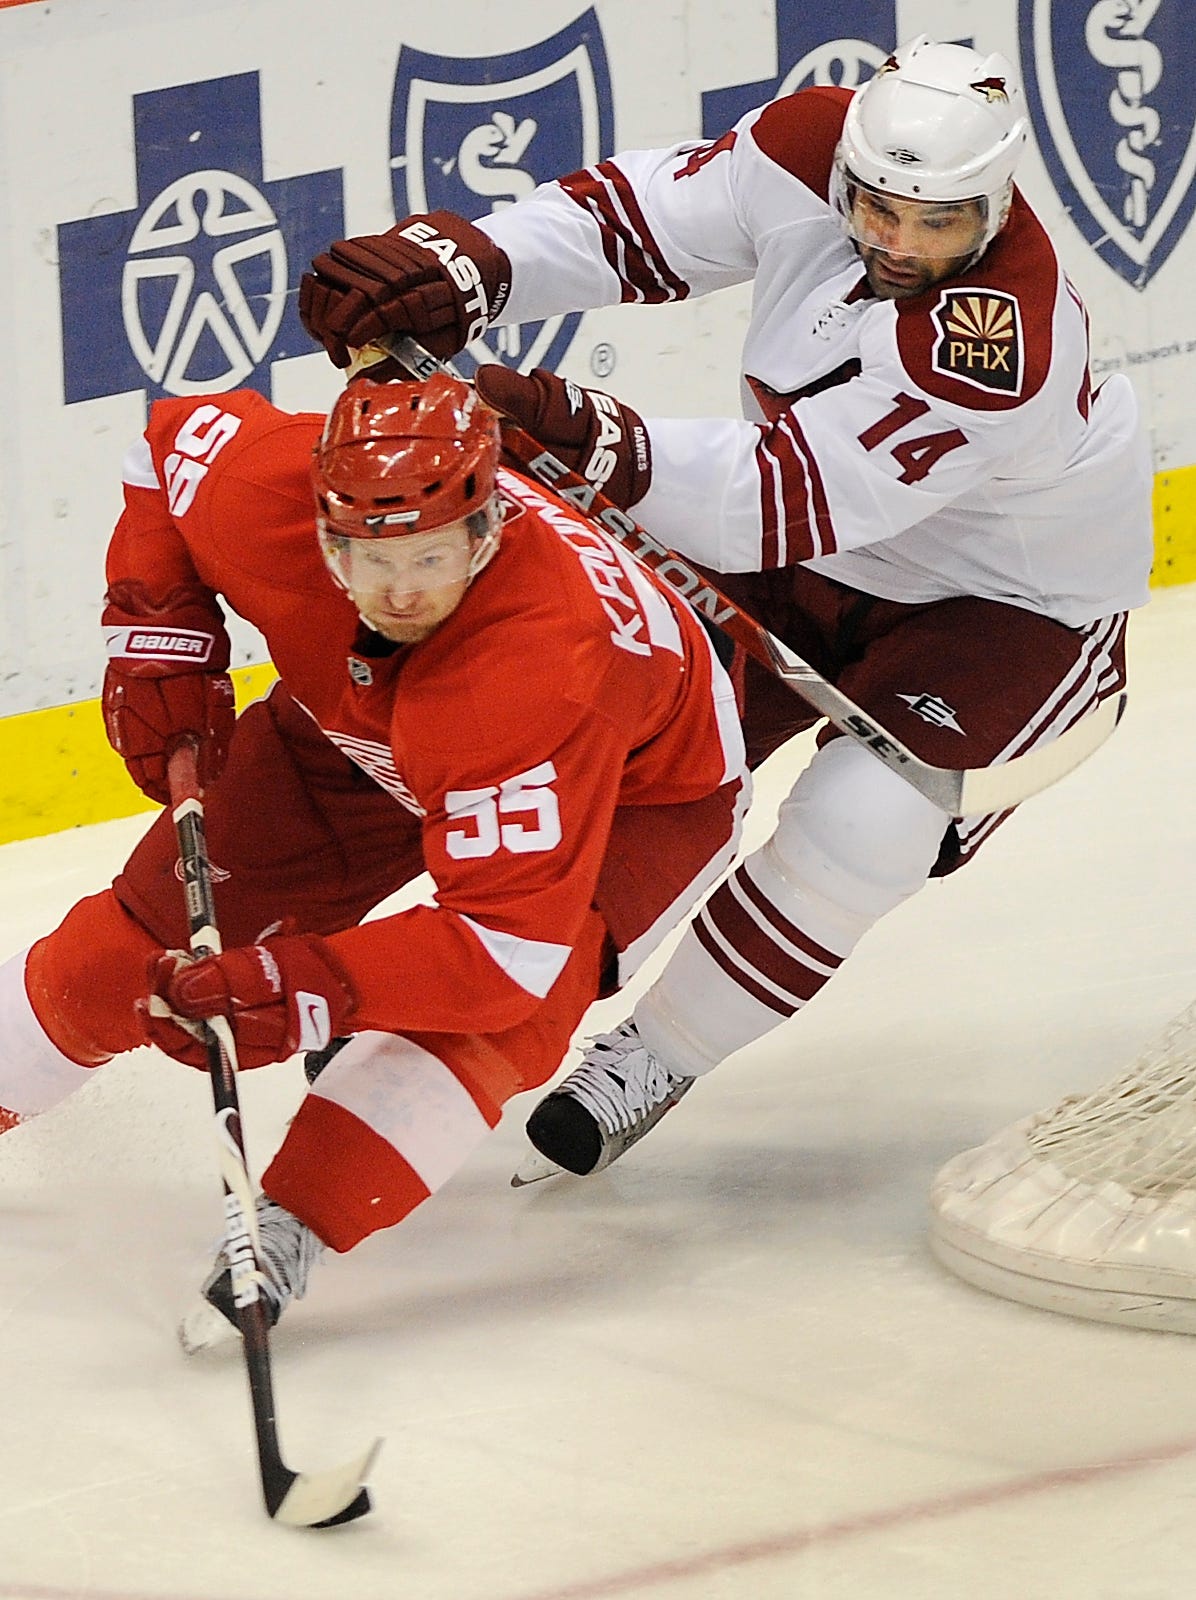 Red Wings ' Niklas Kronwall works the puck around the net with Coyotes ' Nigel Dawes defending during a game at Joe Louis Arena on March 10, 2009.